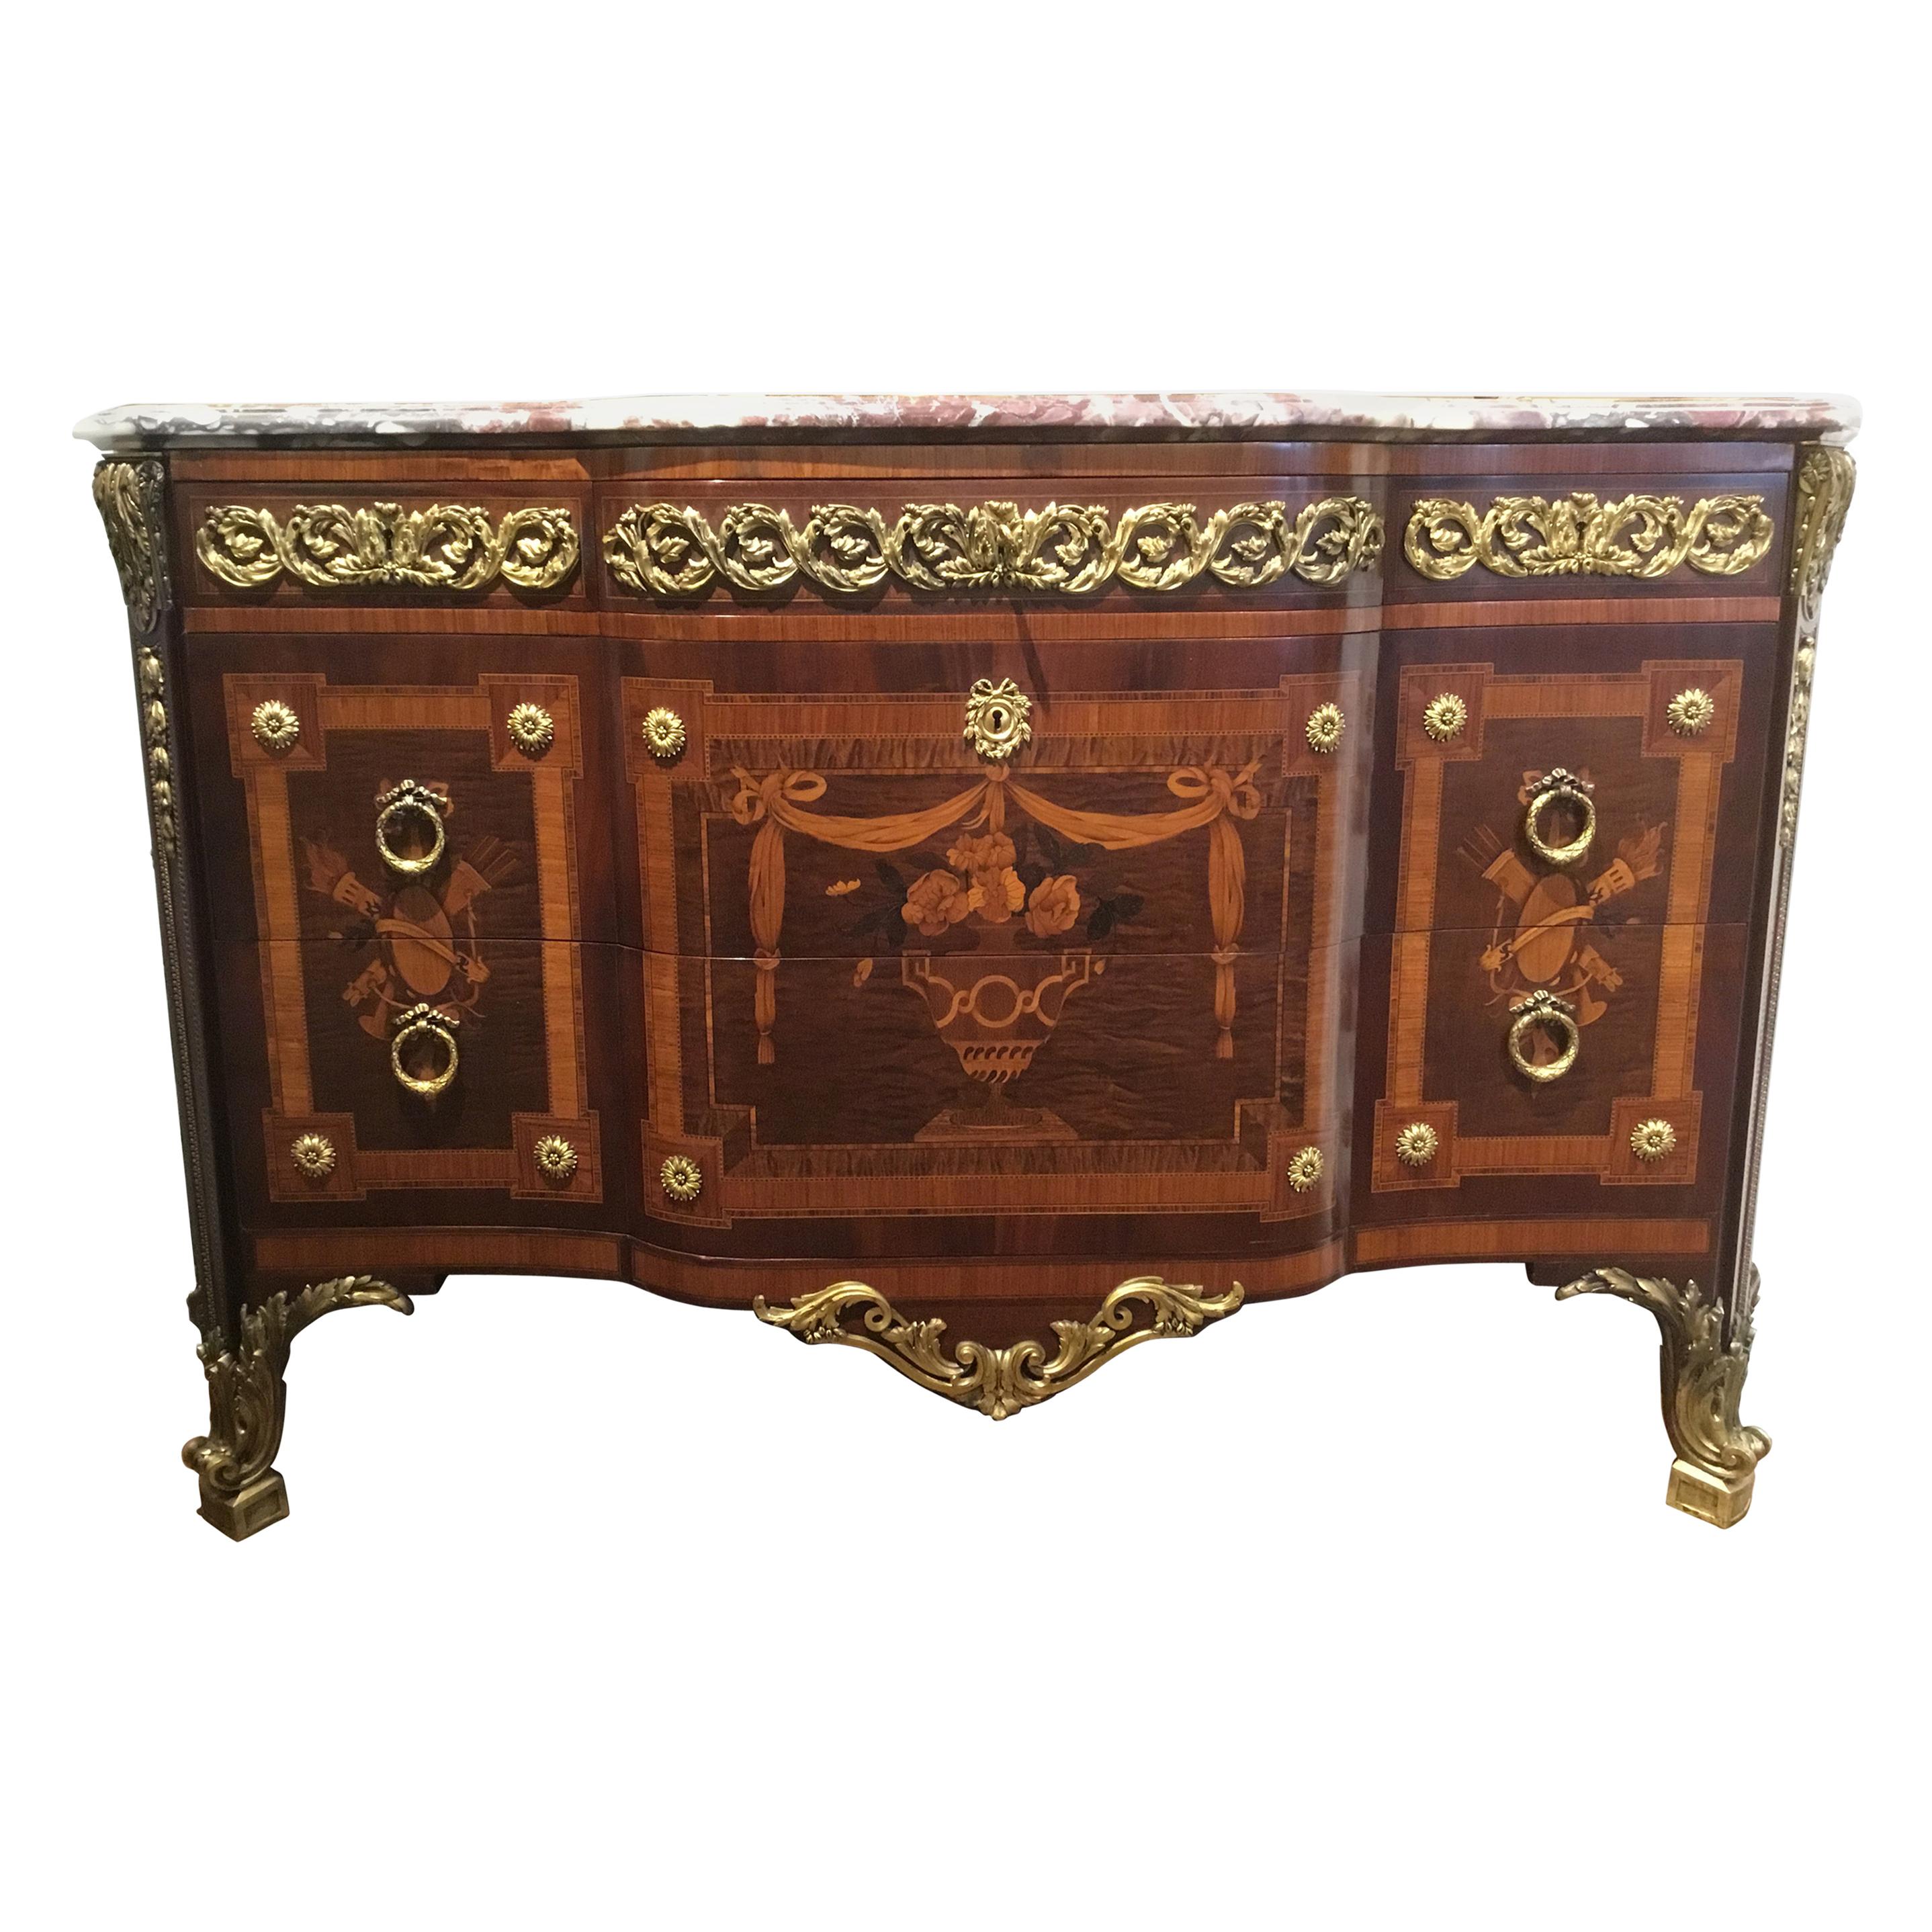 French Regence Marquetry Commode 19th Century with Fine Bronze Dore Mounts